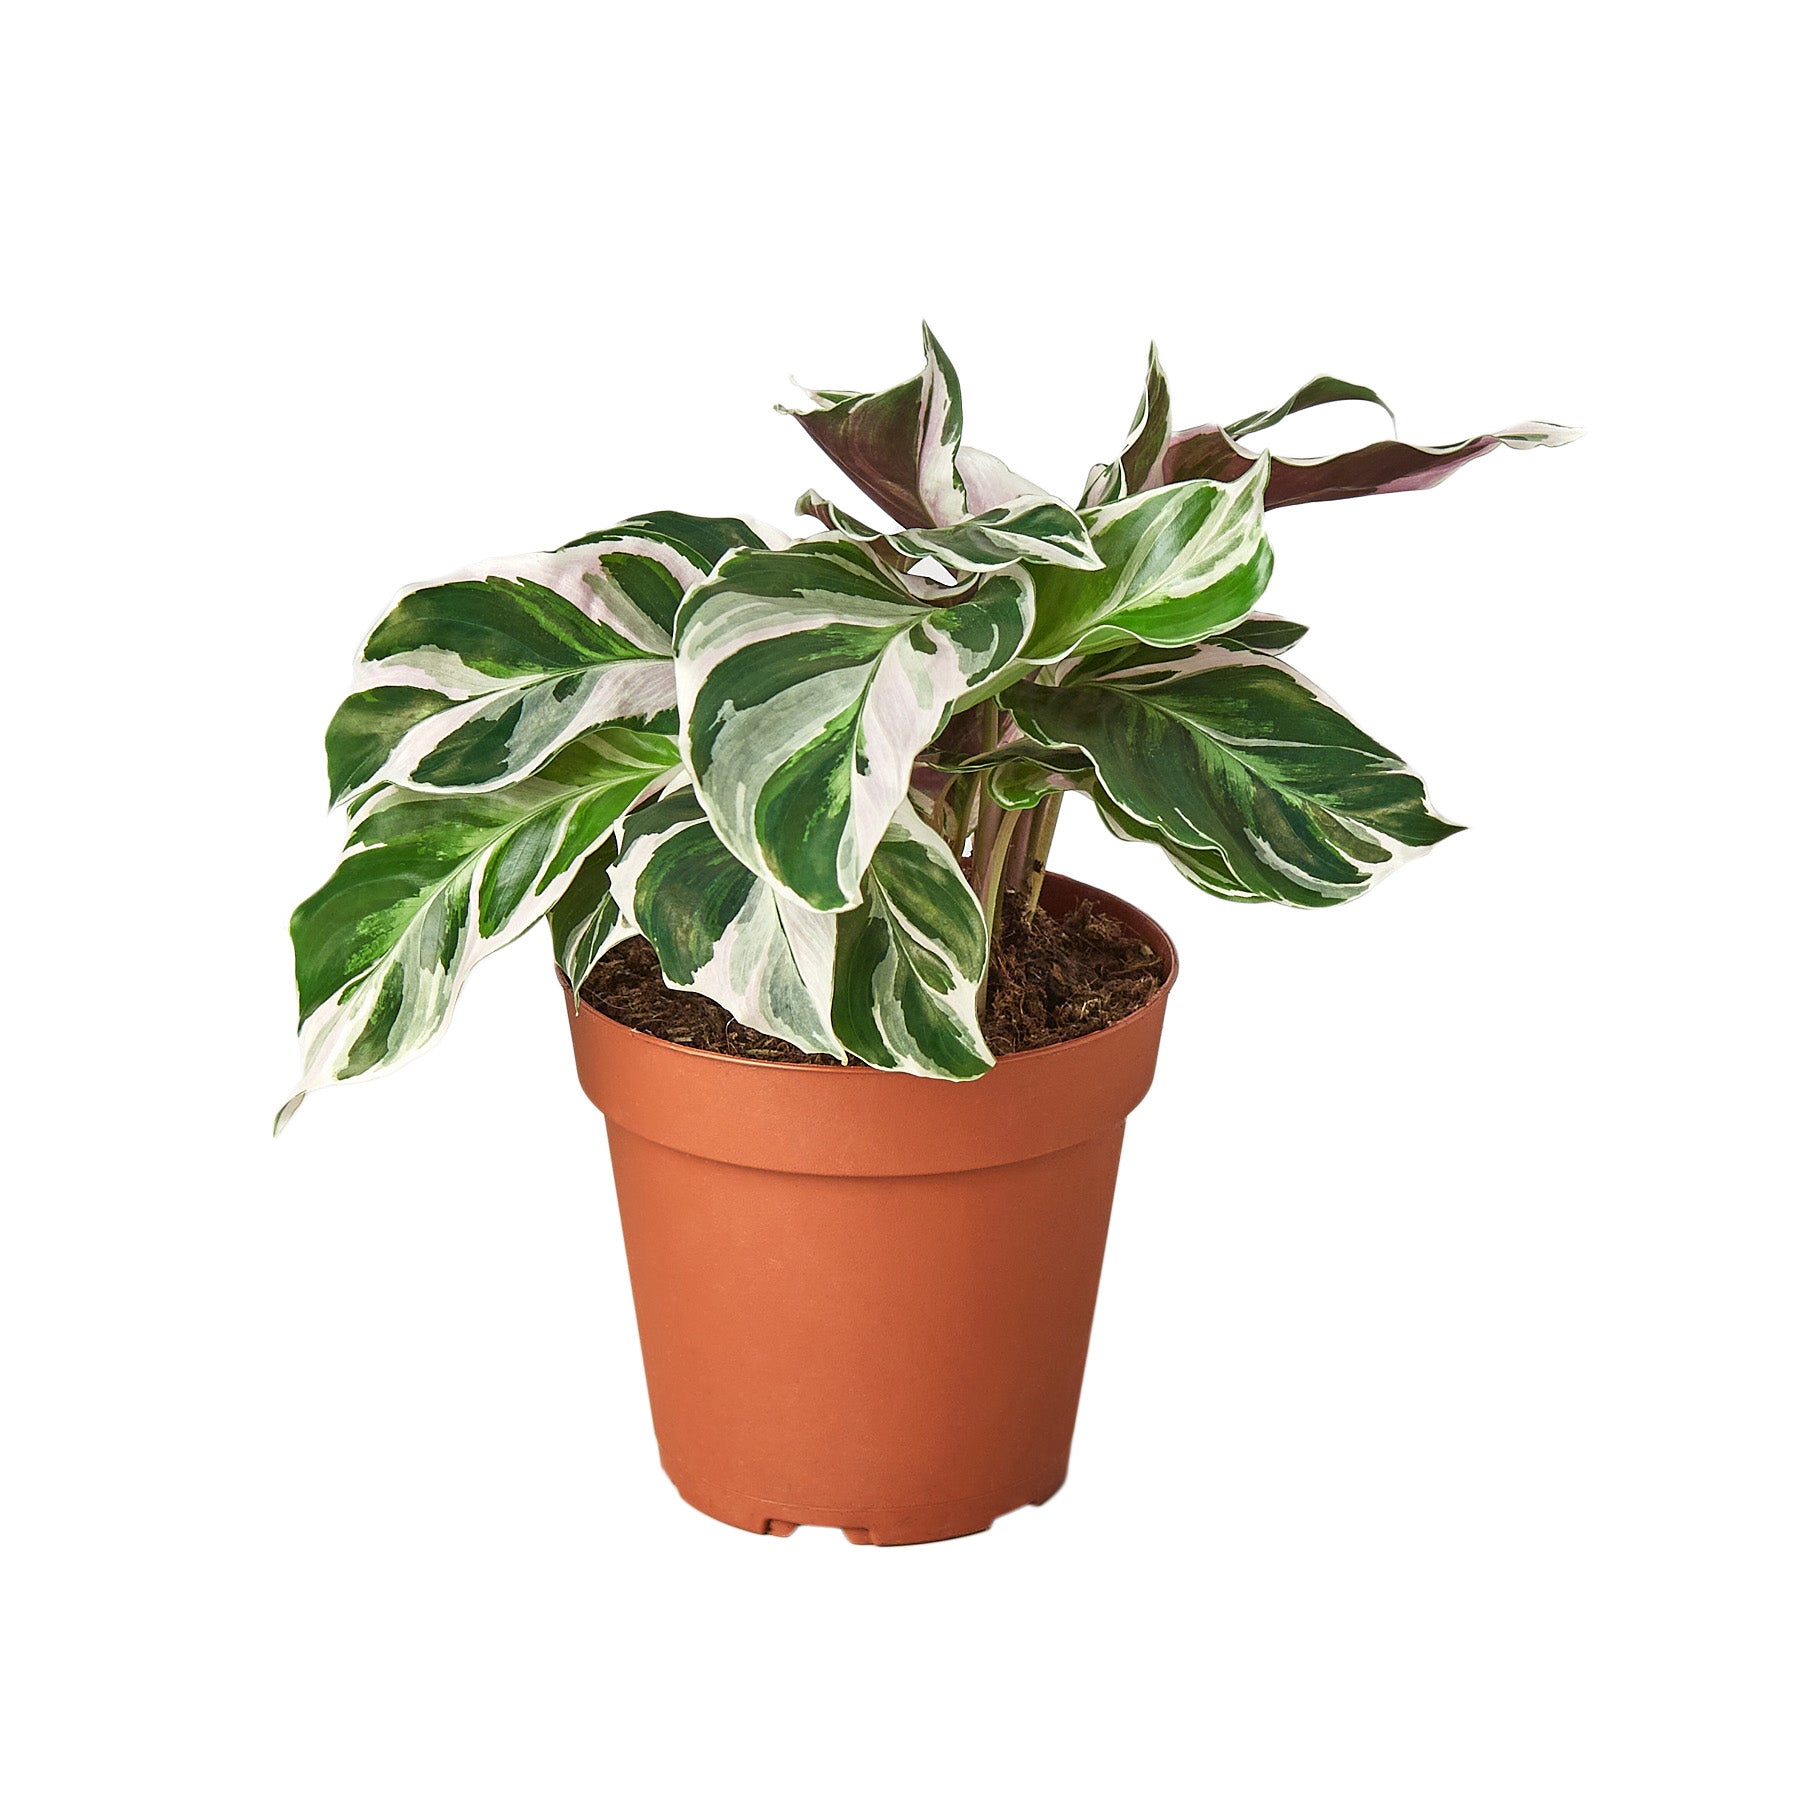 A plant in a pot on a white background, sourced from one of the top garden centers near me.